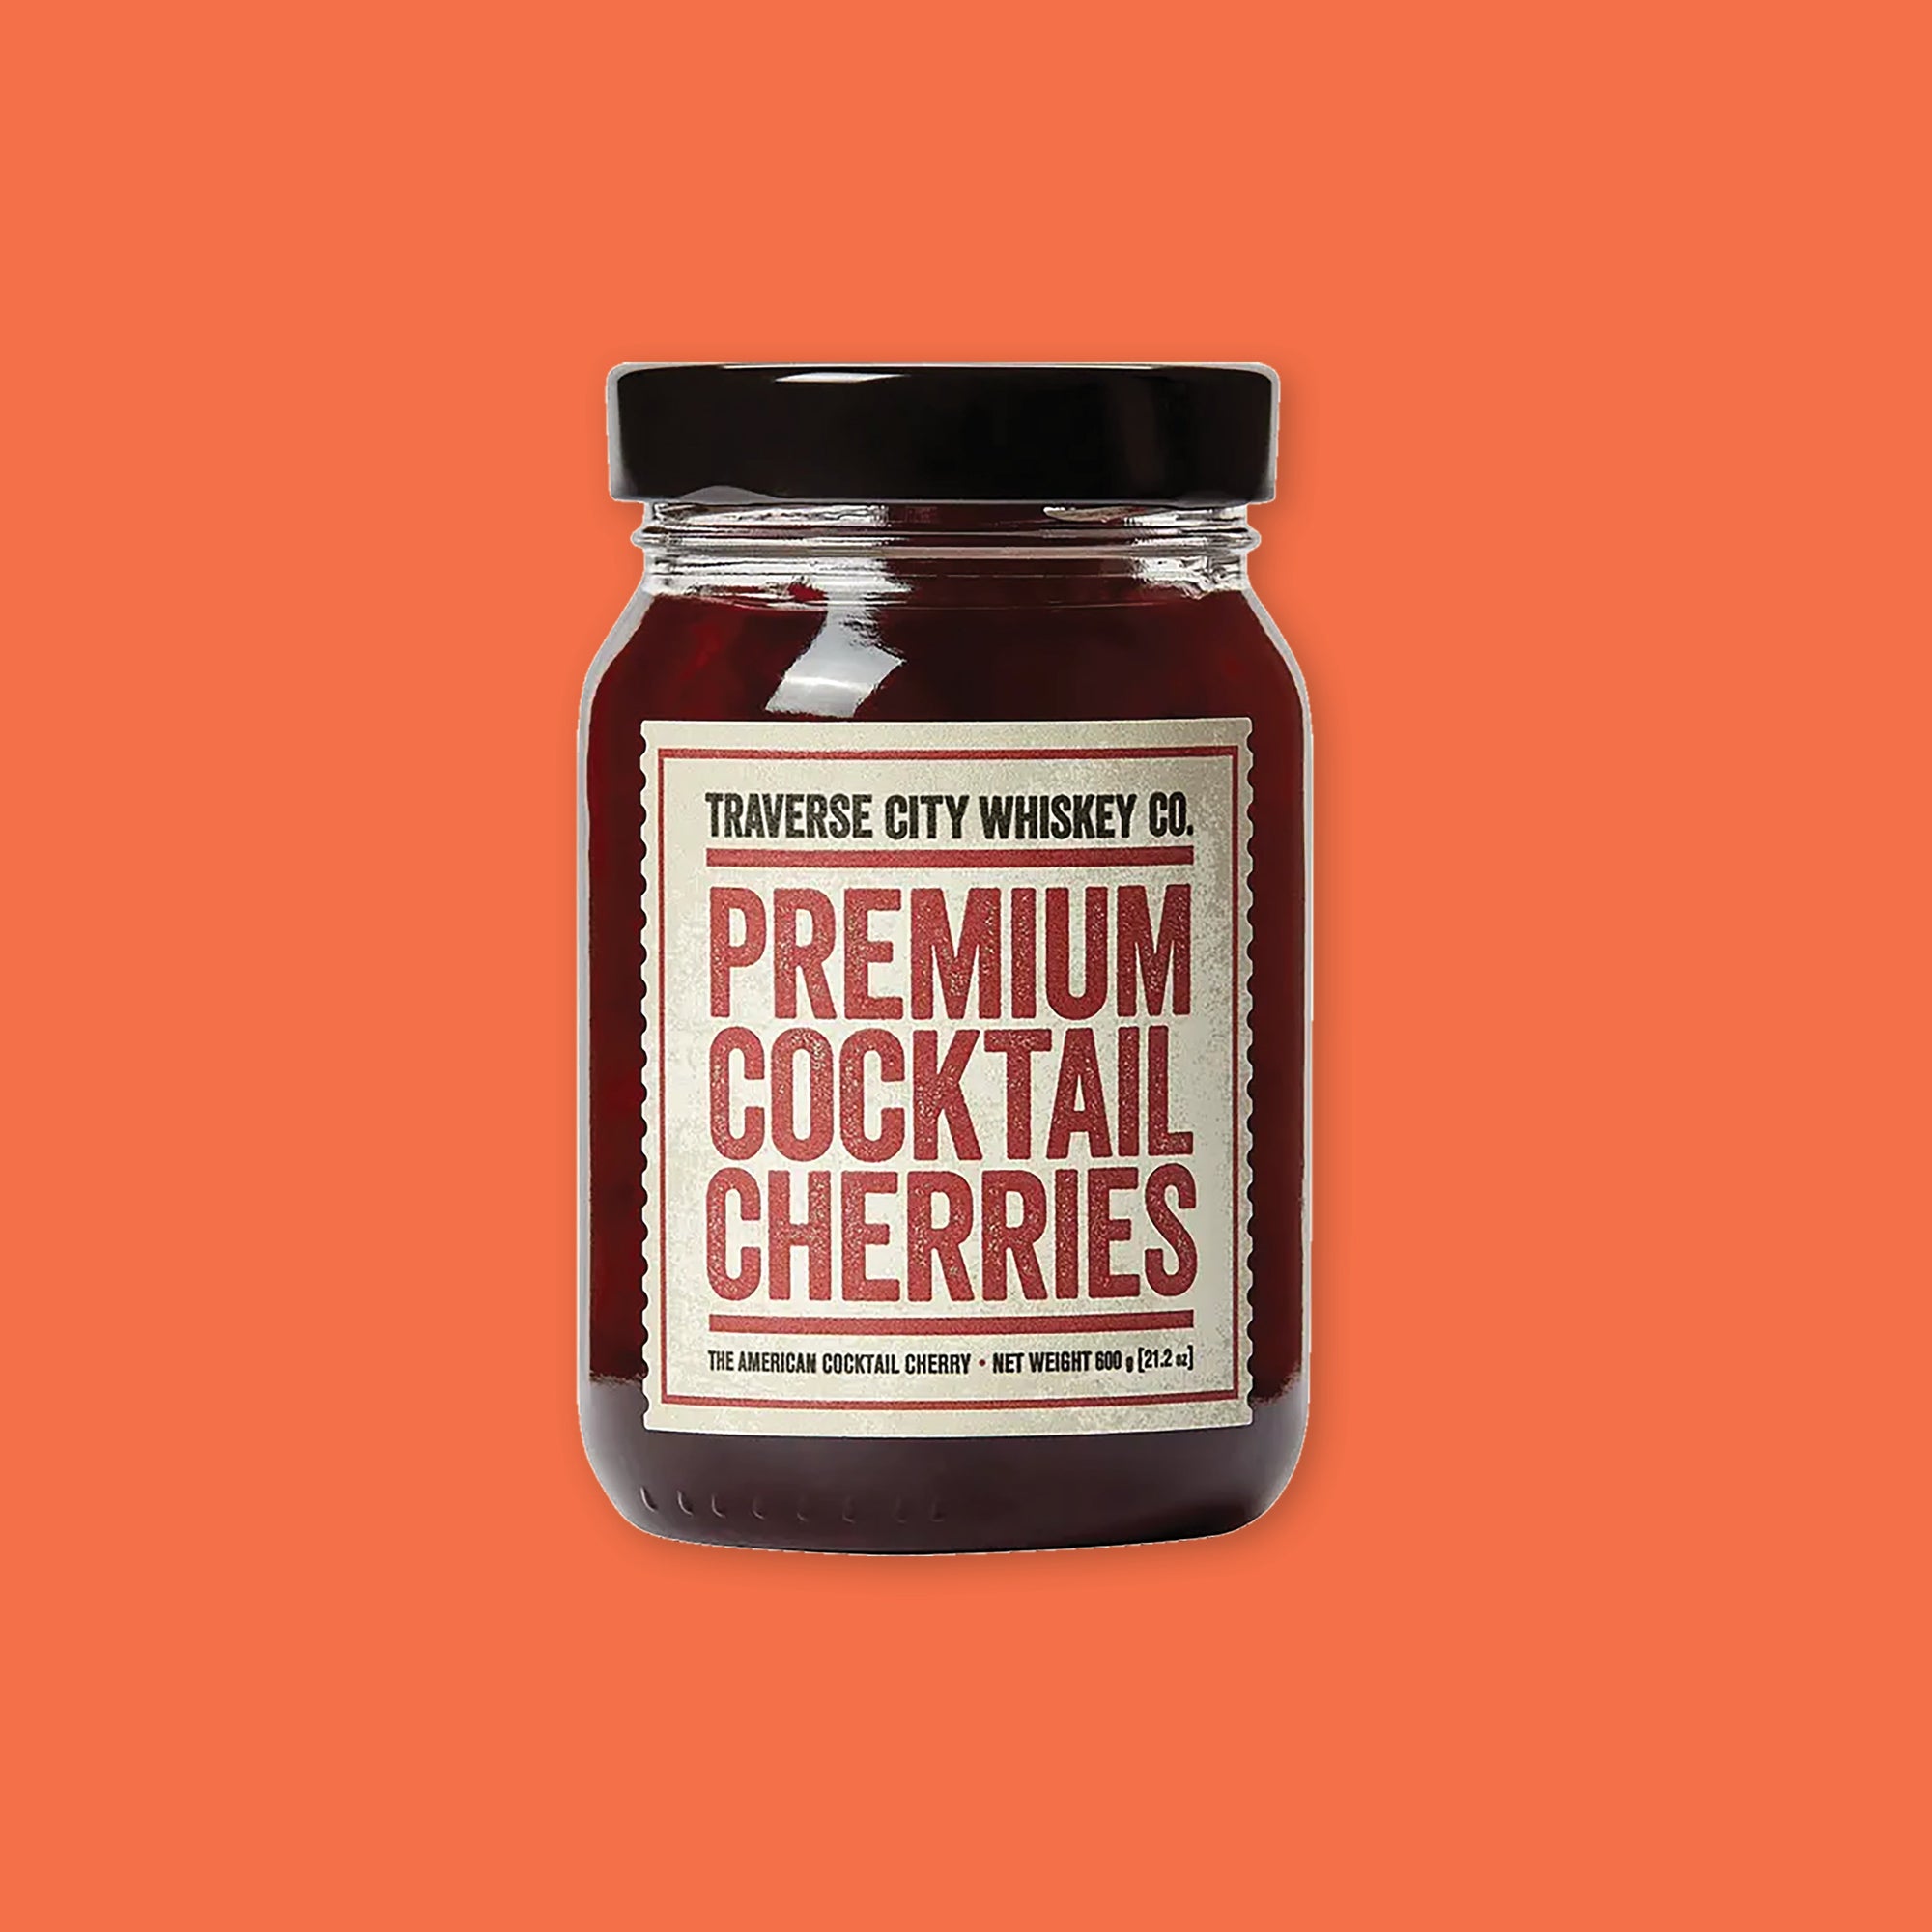 On an orangey-red background sits a jar. The glass jar has a black lid and and a vintage creamy label that says "TRAVERSE CITY WHISKEY CO." in black, all caps block font. Under it is a red line and it says "PREMIUM COCKTAIL CHERRIES" in a red, all caps block font. There is another red line under that and then it says "THE AMERICAN COCKTAIL CHERRY • NET WEIGHT 600 g (21.2 oz)." There is a red outline square around the copy.